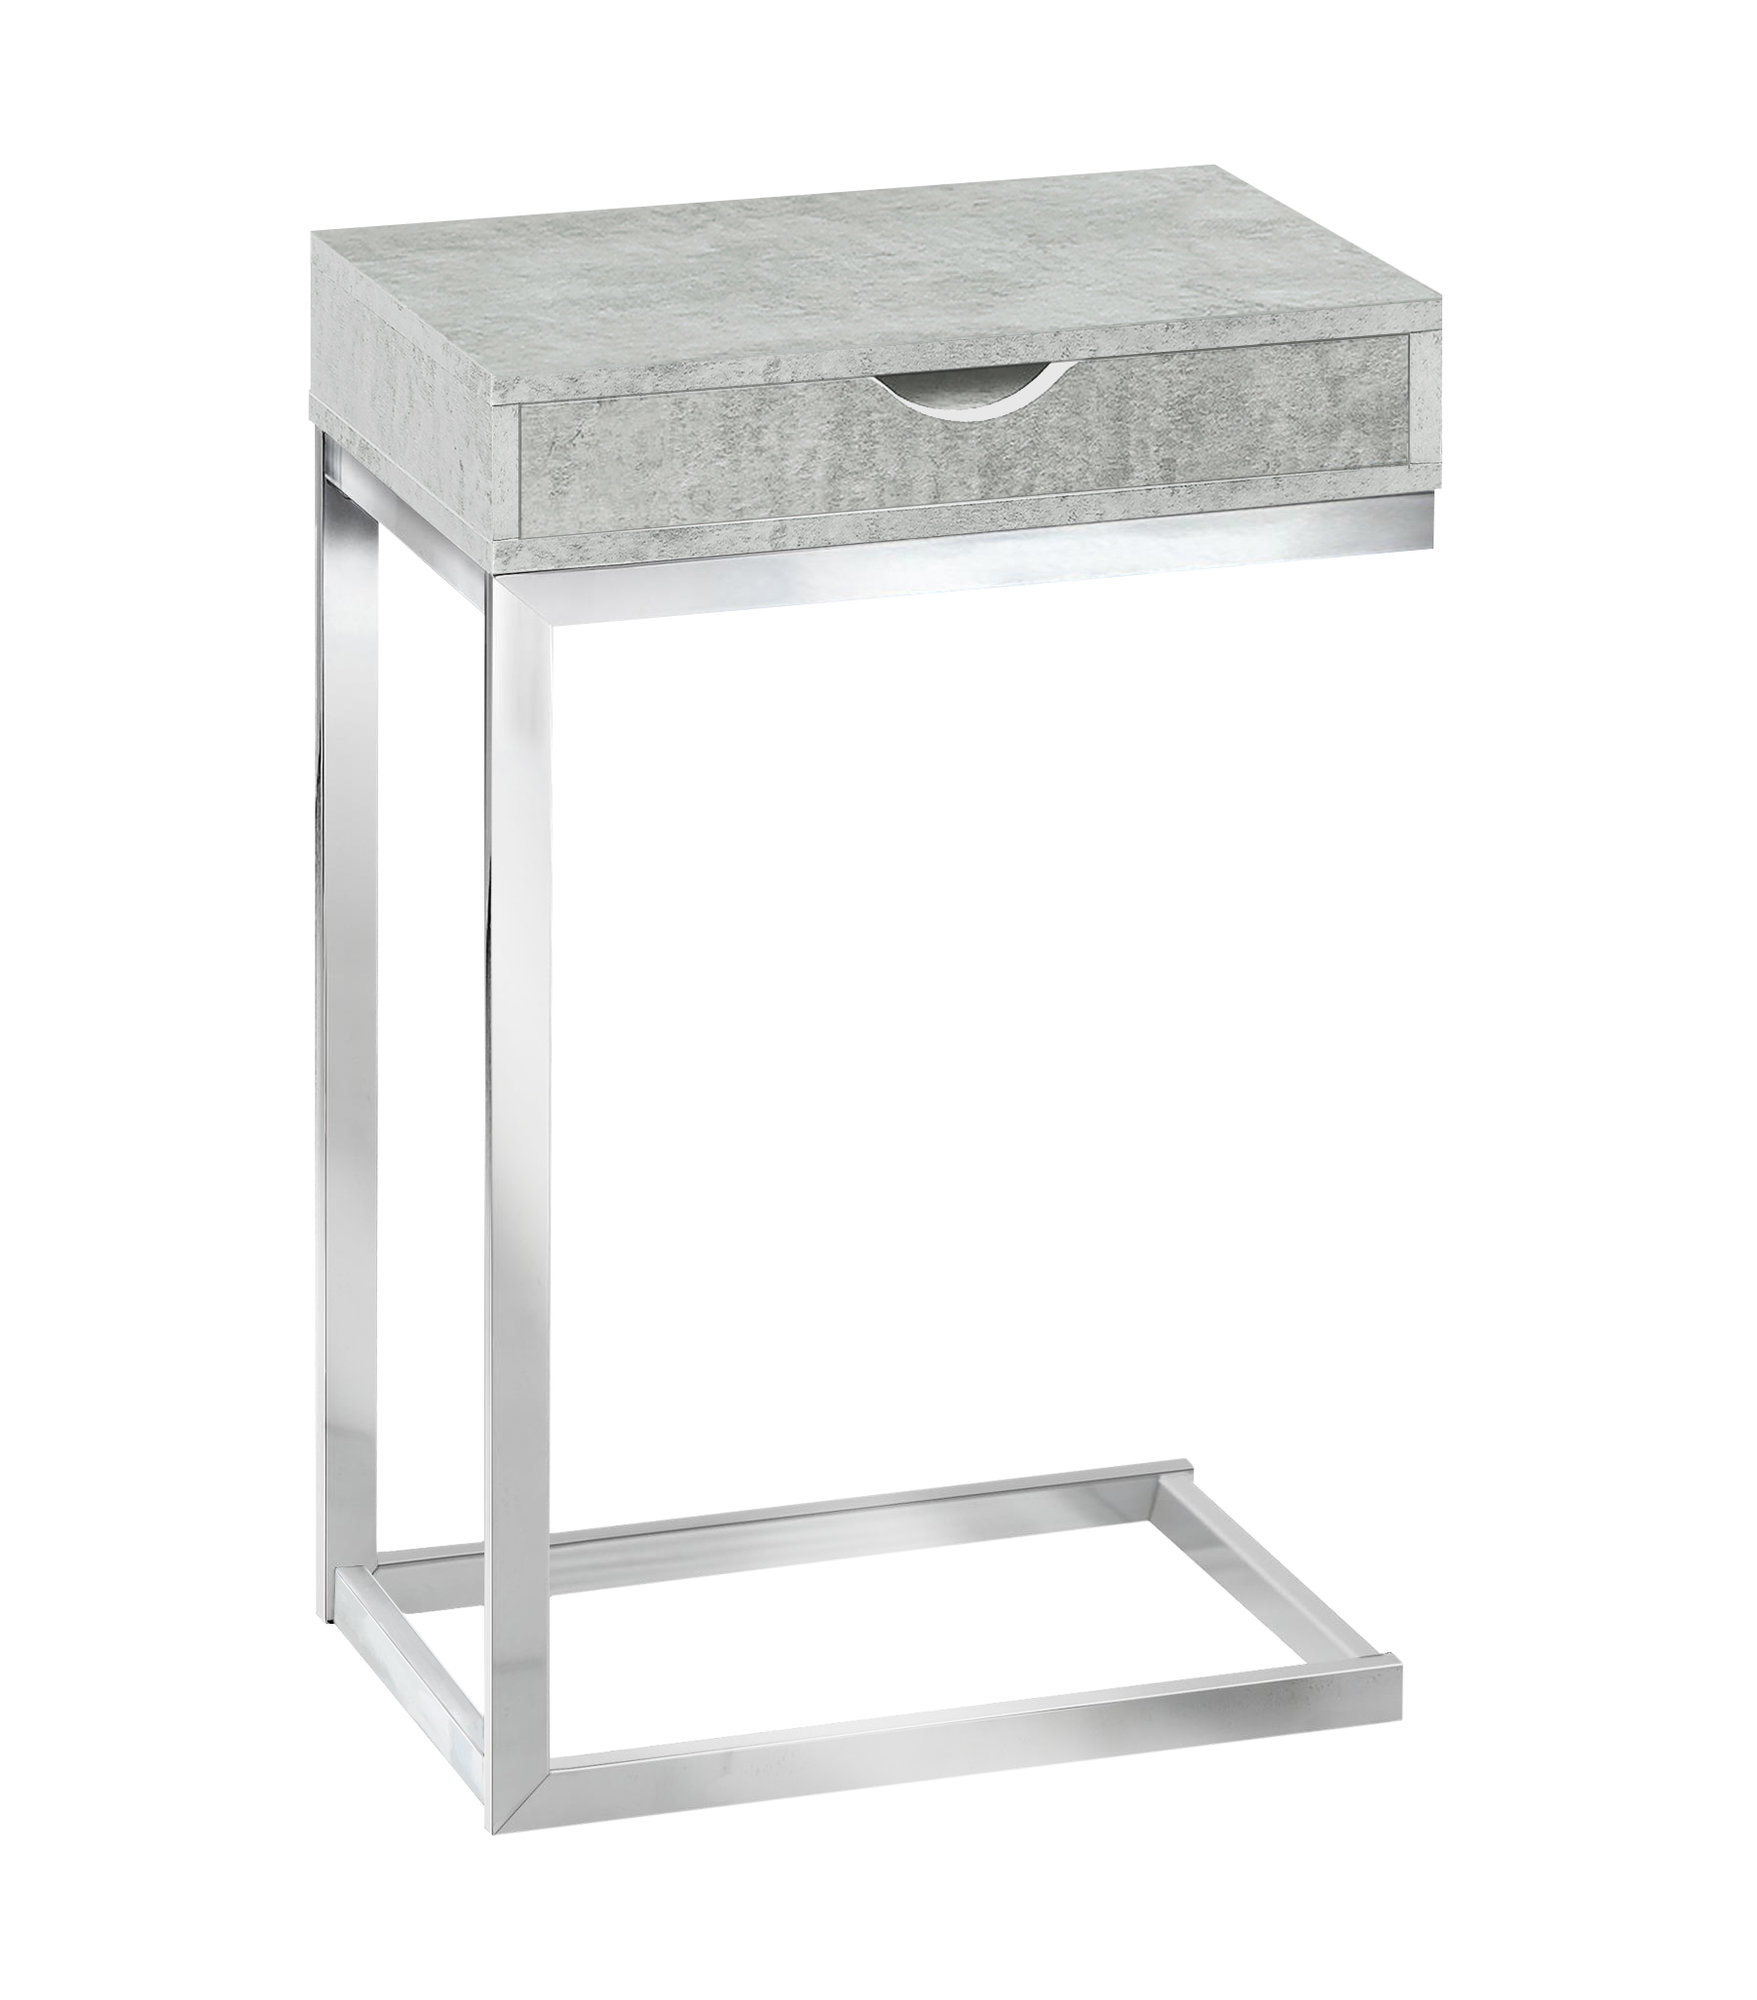 Accent Table - Chrome Metal / Grey Cement With A Drawer